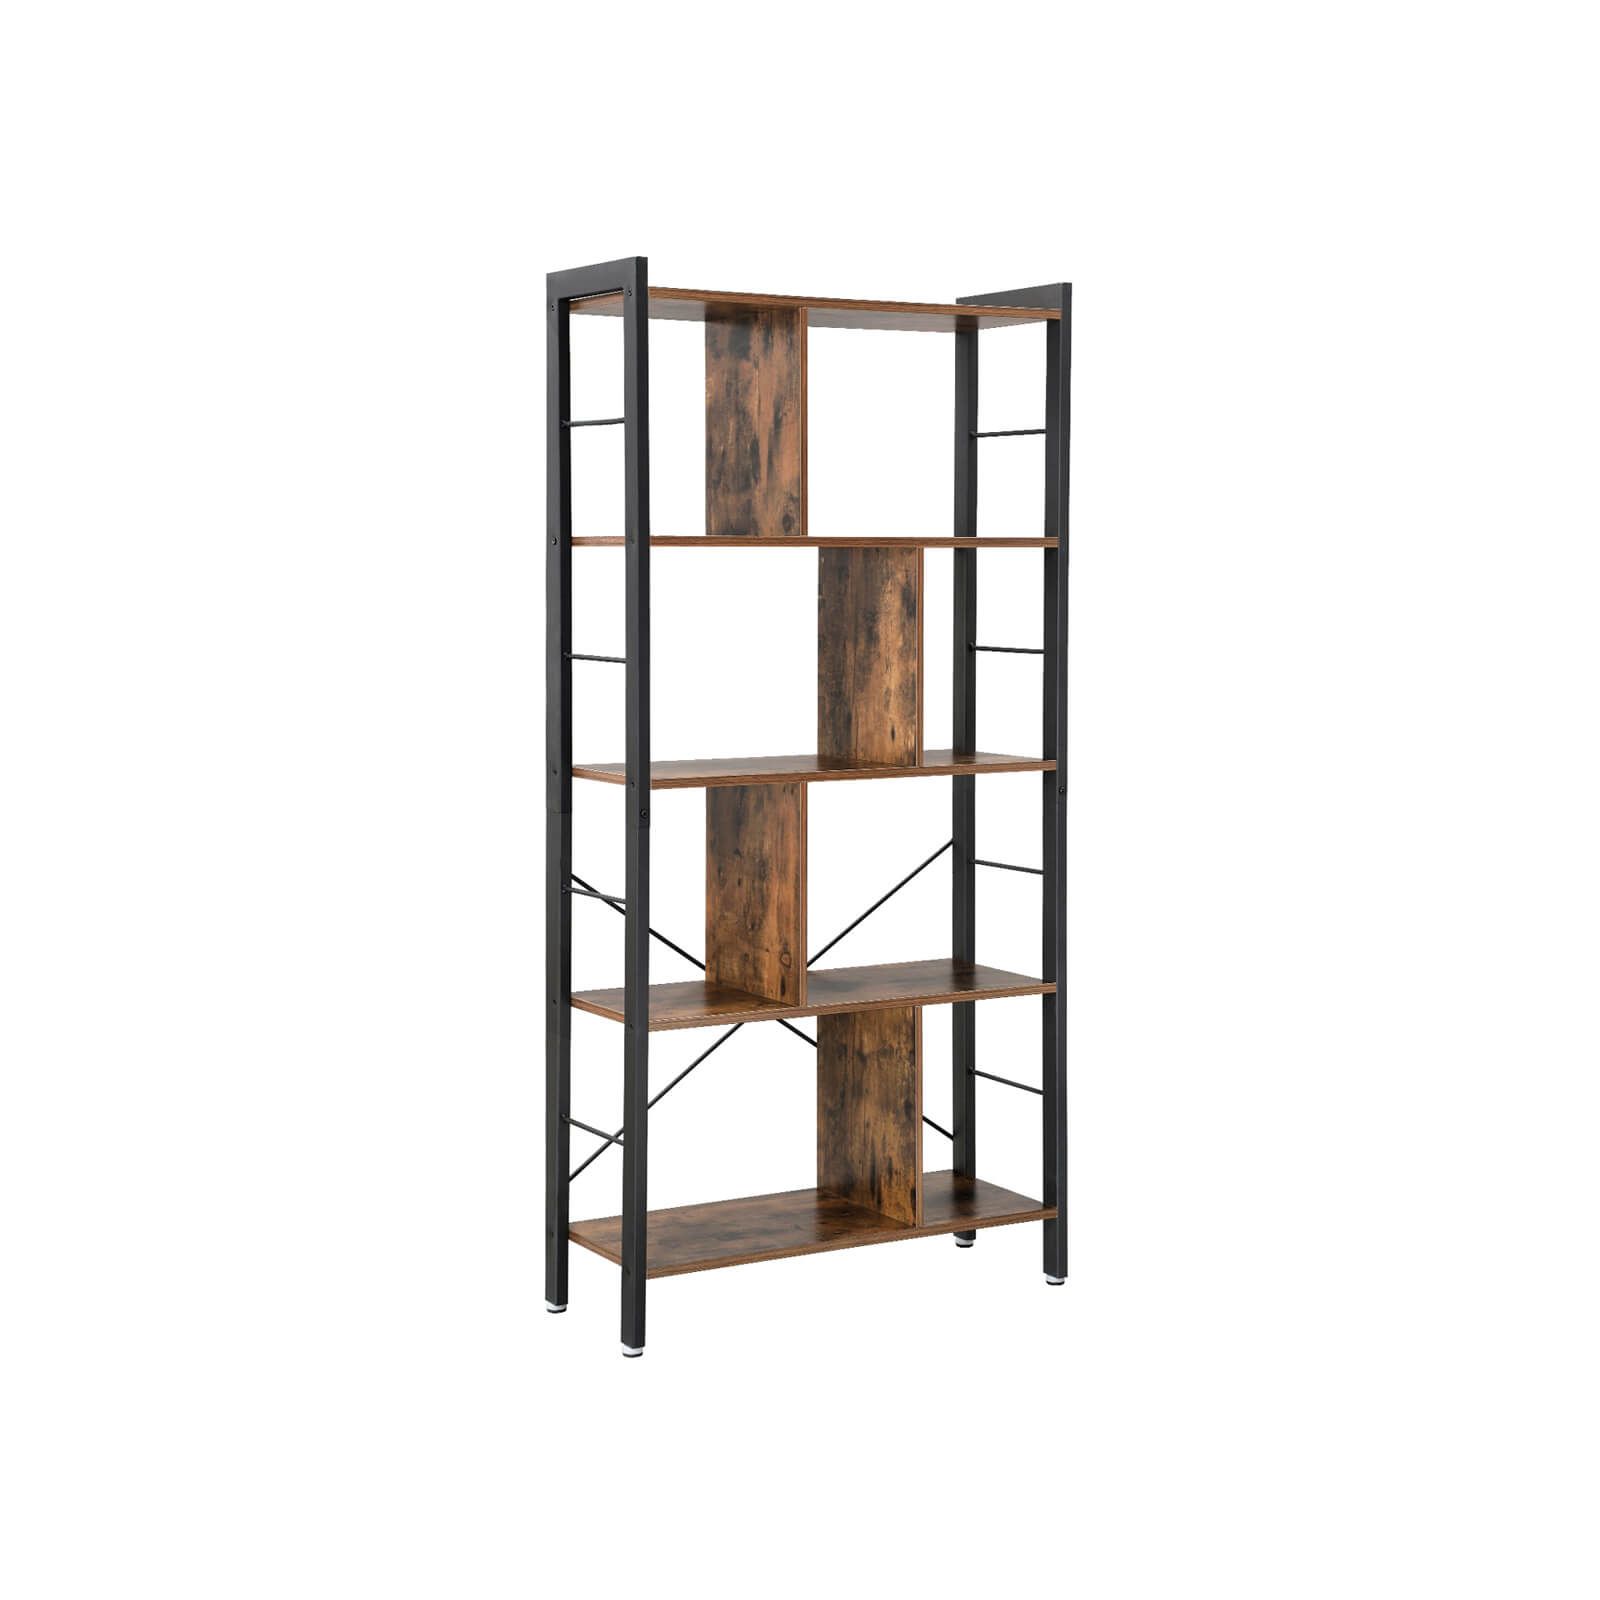 Industrial Style Bookshelf For Sale | Home Office Furniture | Vasagle Songmics For Four Tier Bookcases (View 13 of 15)